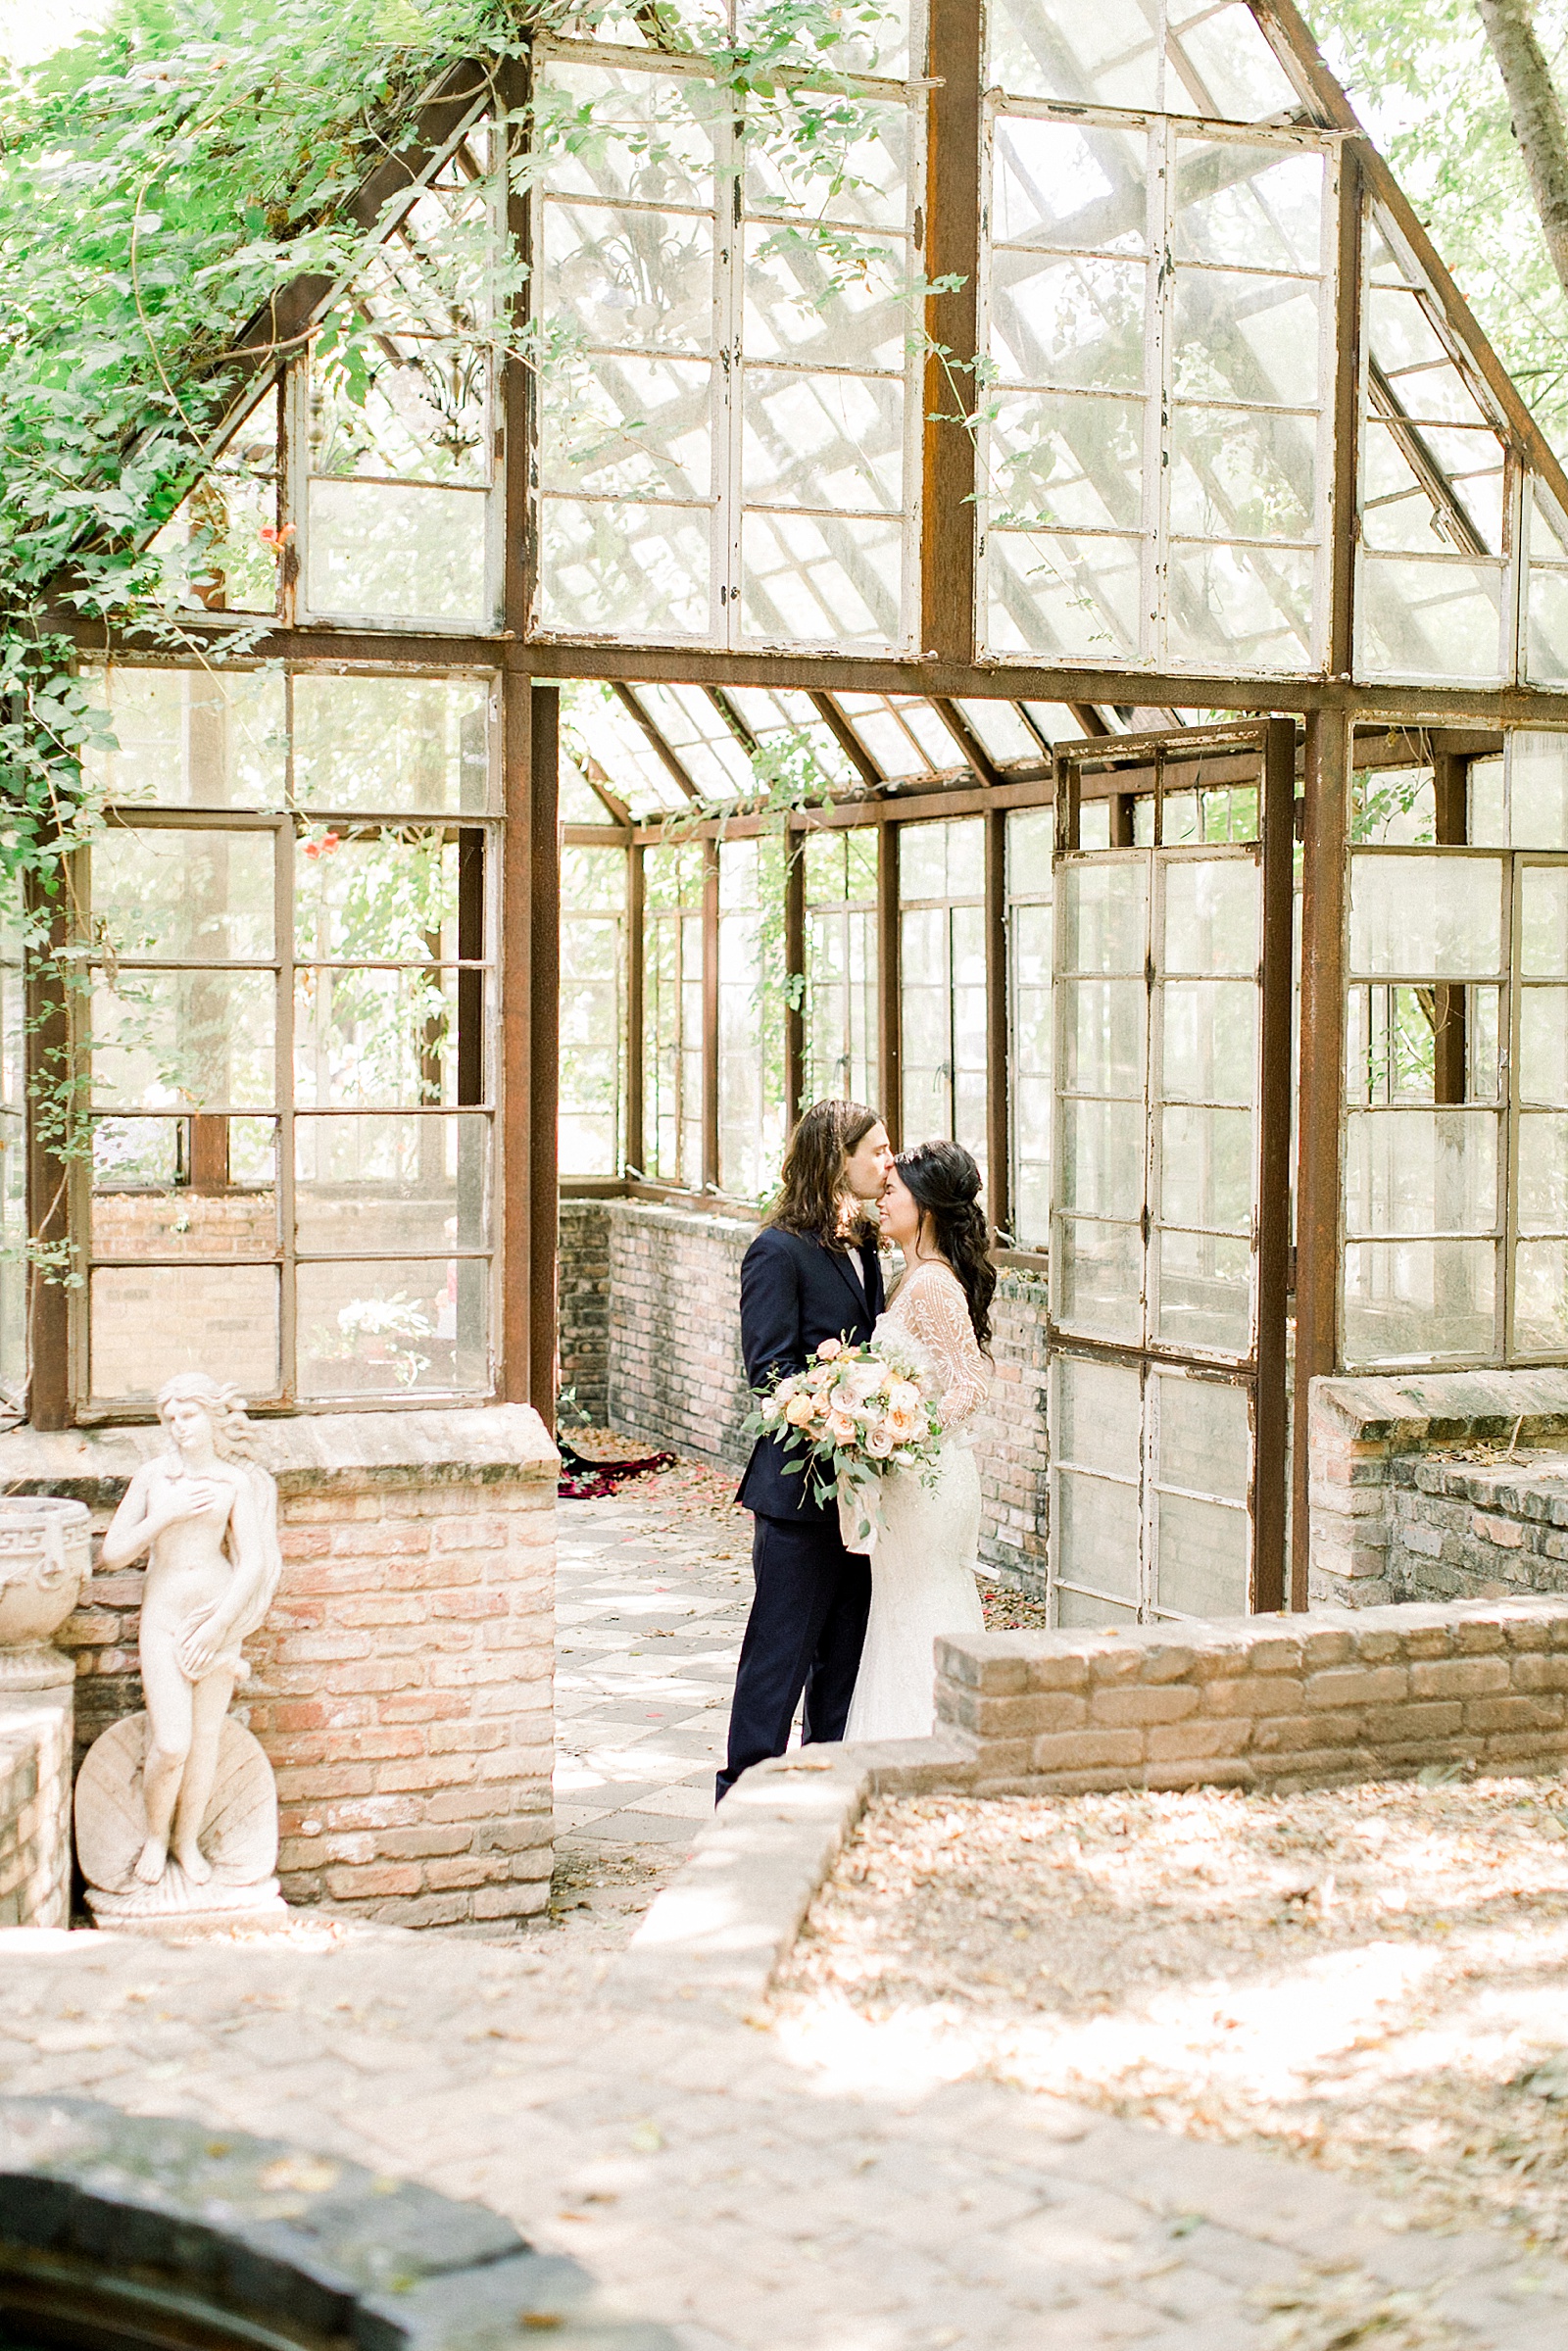 Best Wedding Venues for Elopements, Anna Kay Photography